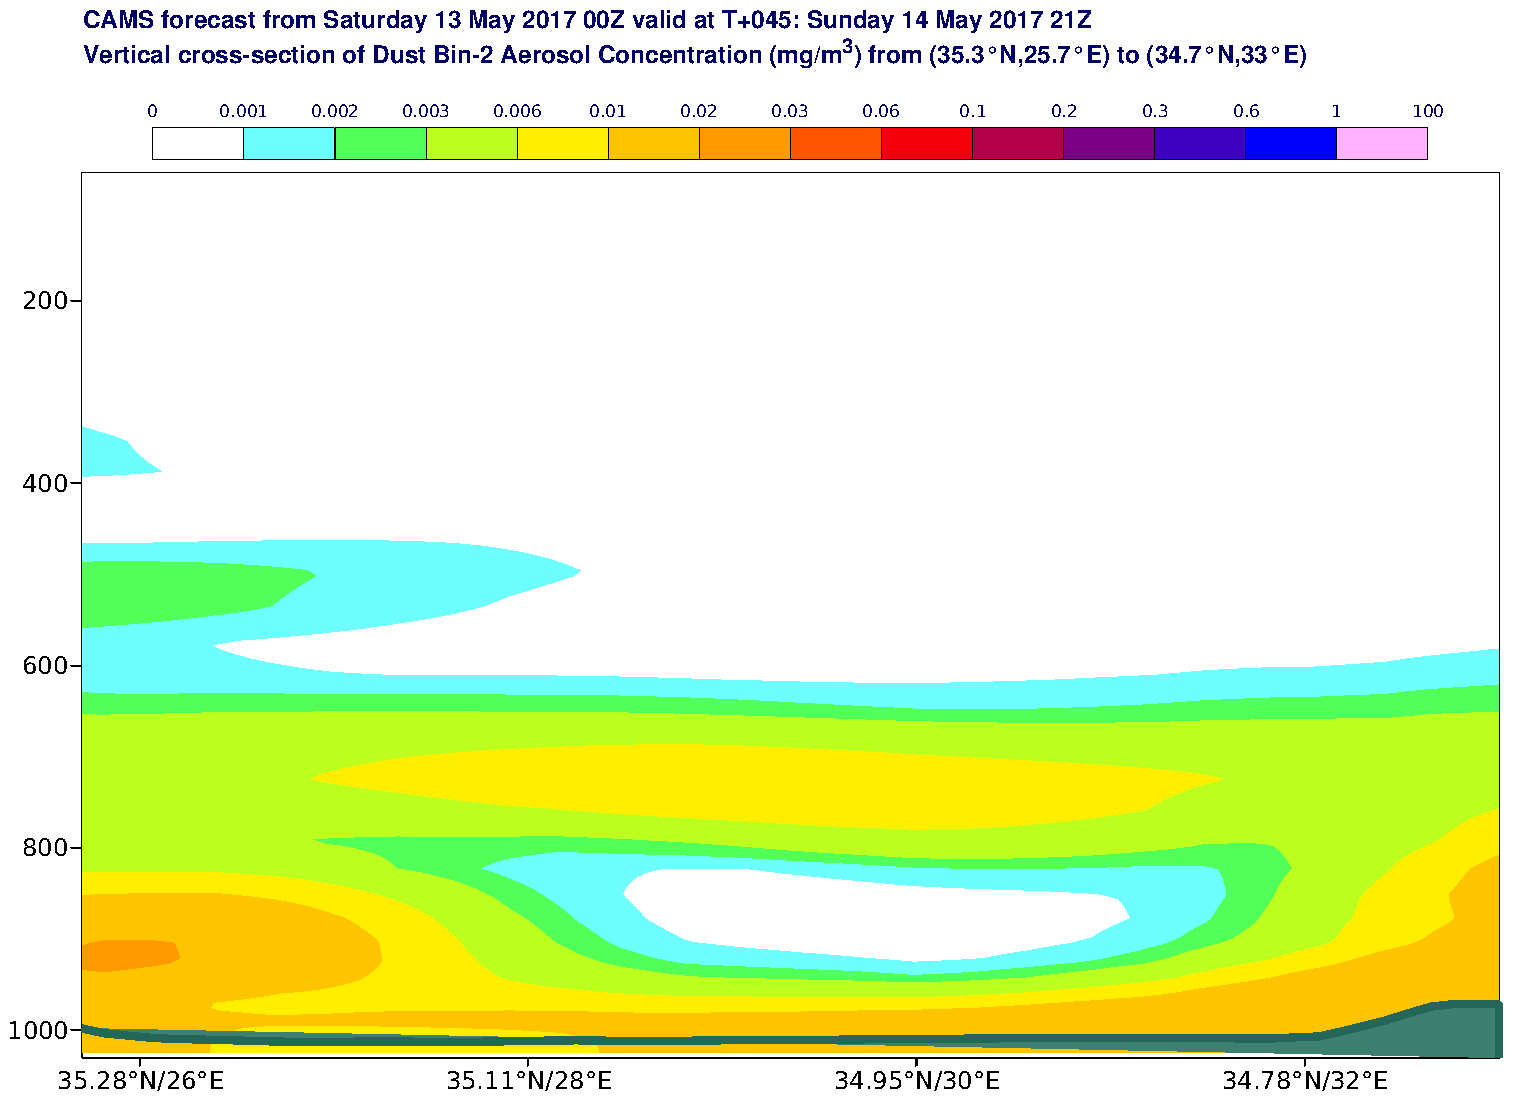 Vertical cross-section of Dust Bin-2 Aerosol Concentration (mg/m3) valid at T45 - 2017-05-14 21:00